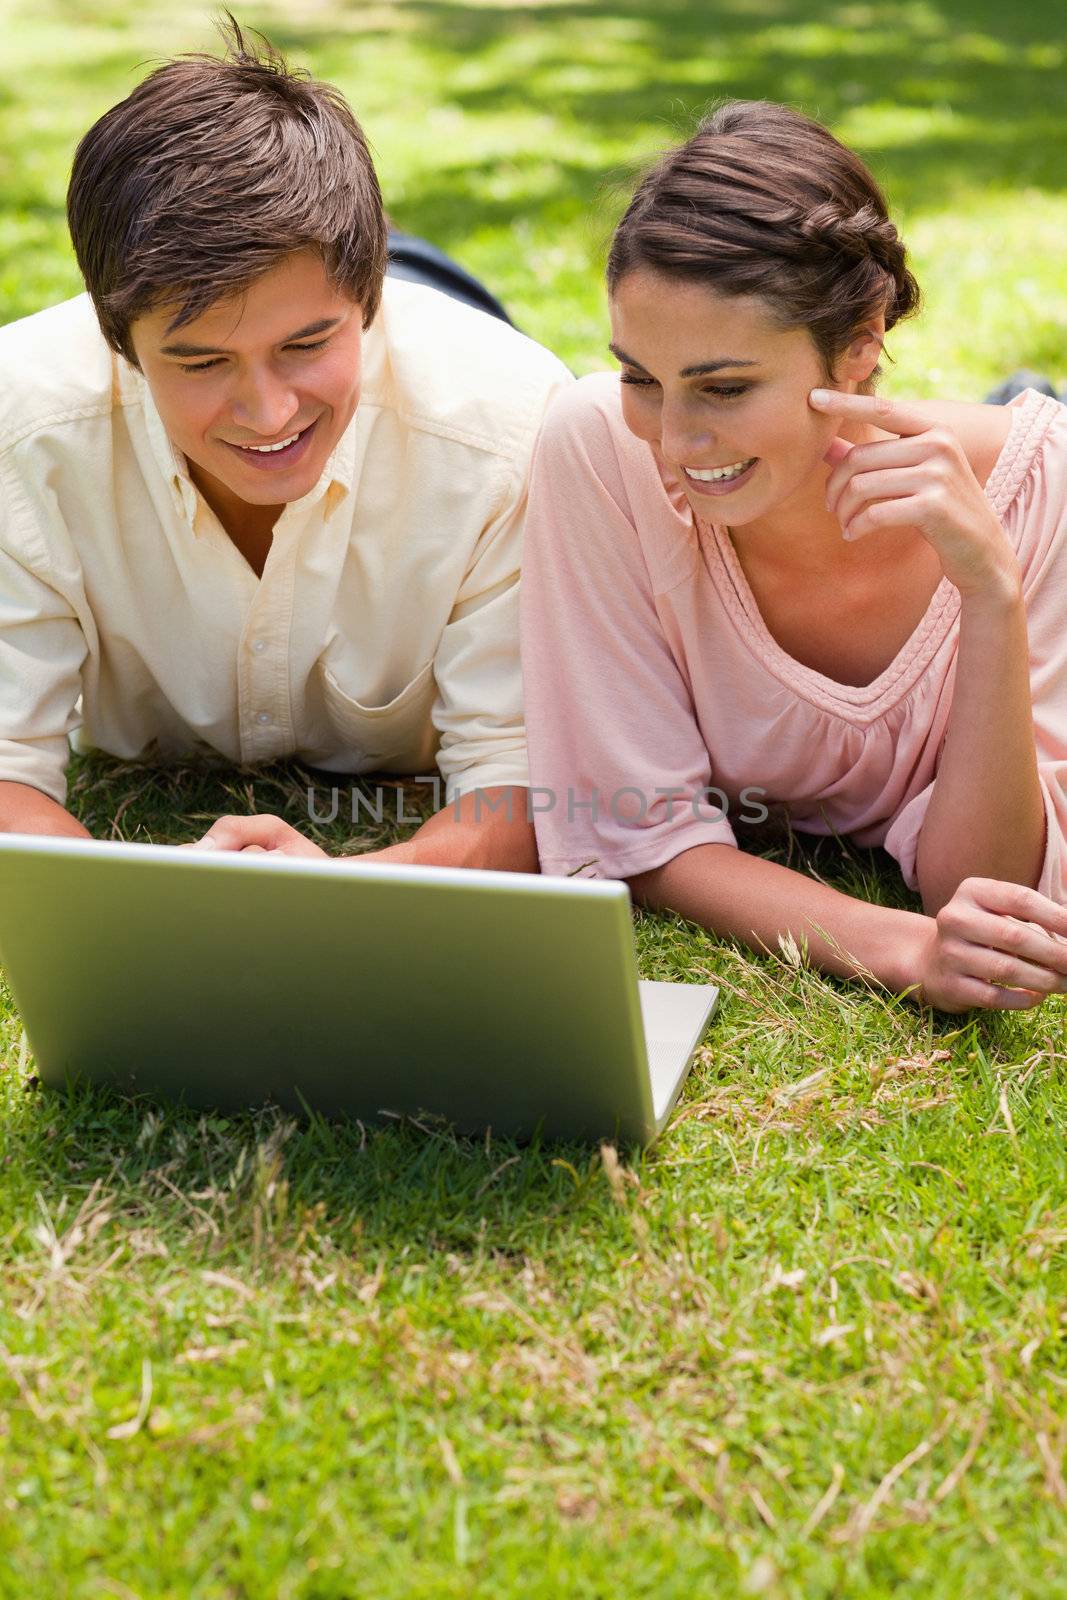 Two friends smiling while using a laptop together as they lie down in the grass